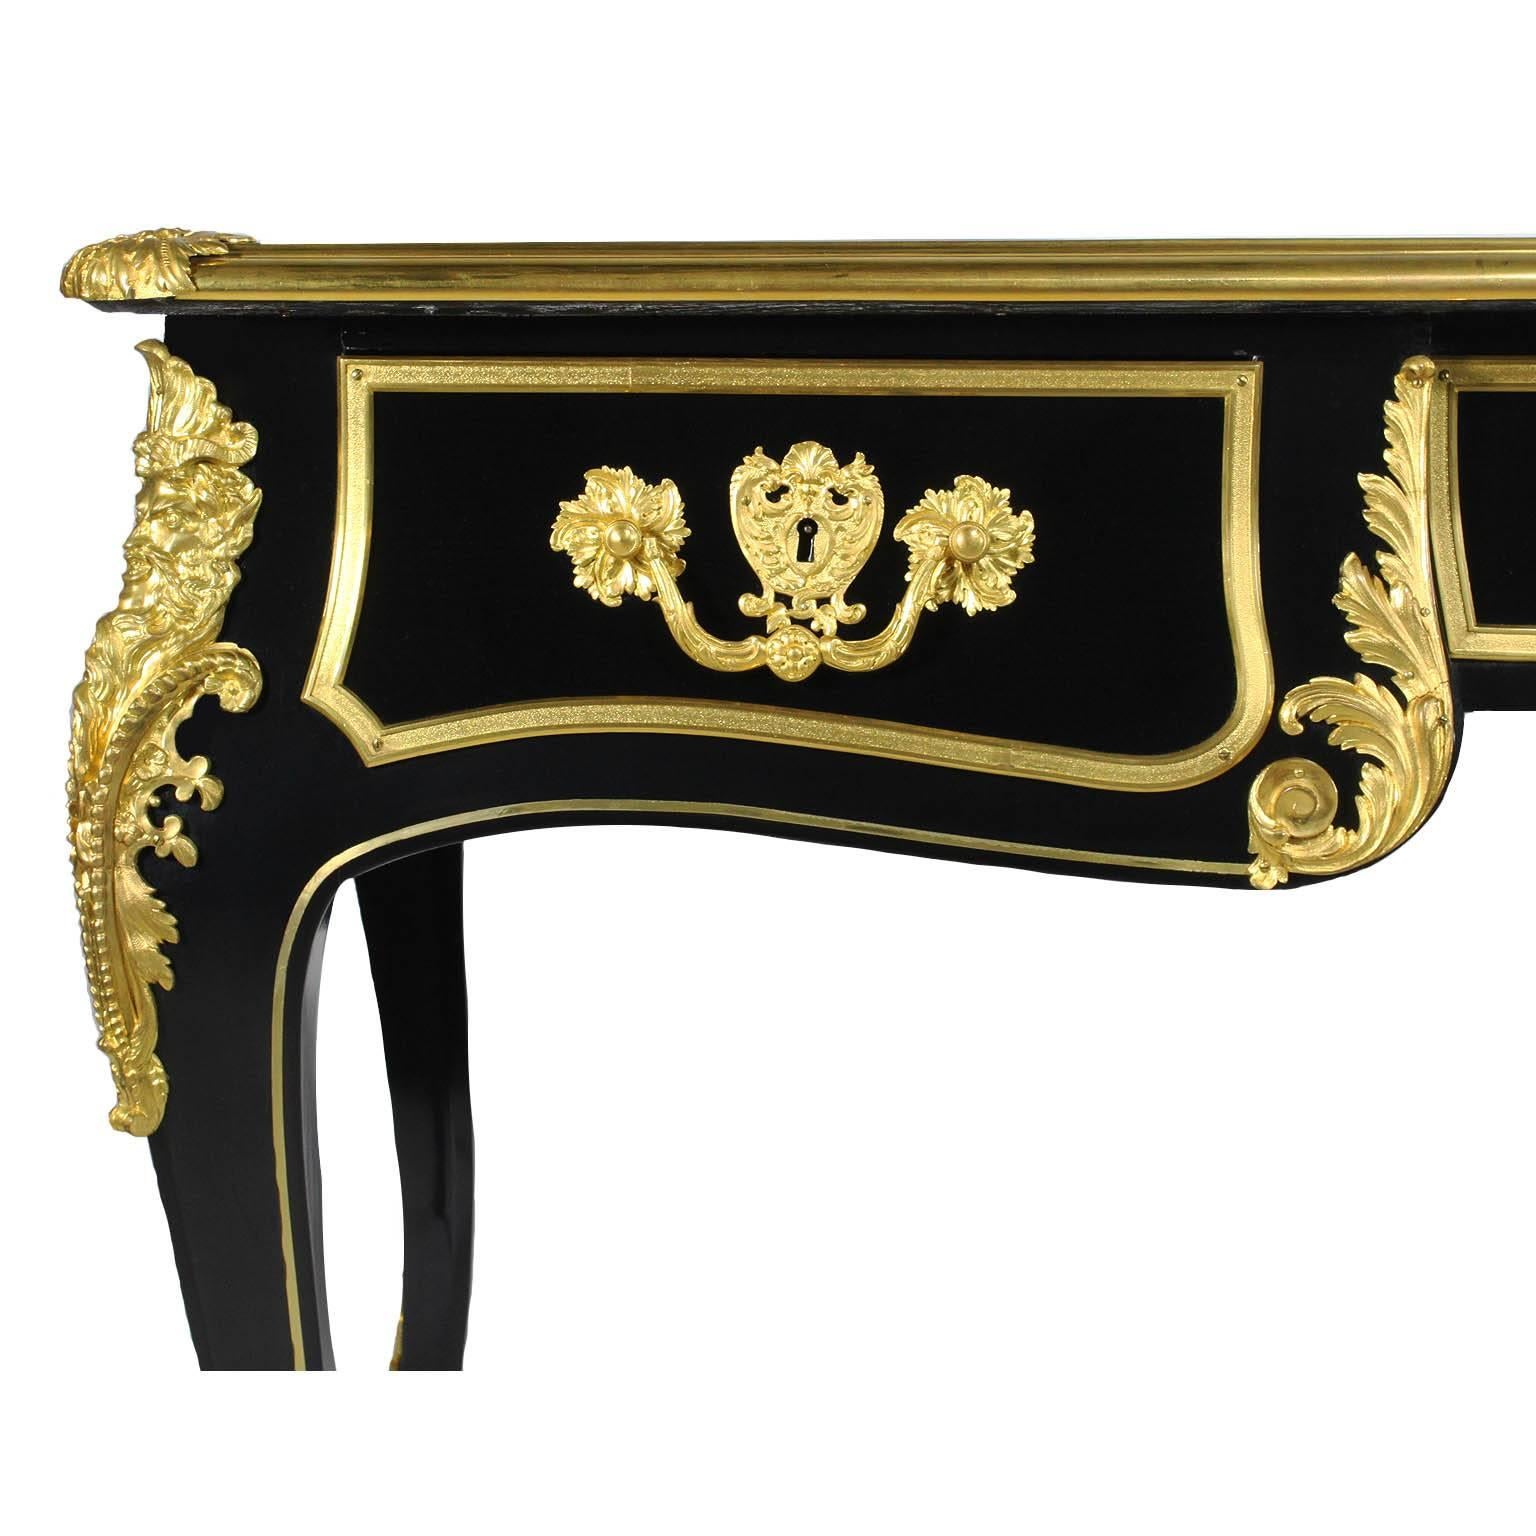 French 19th Century Louis XV Style Ebonized Wood and Gilt Bronze-Mounted Desk For Sale 1